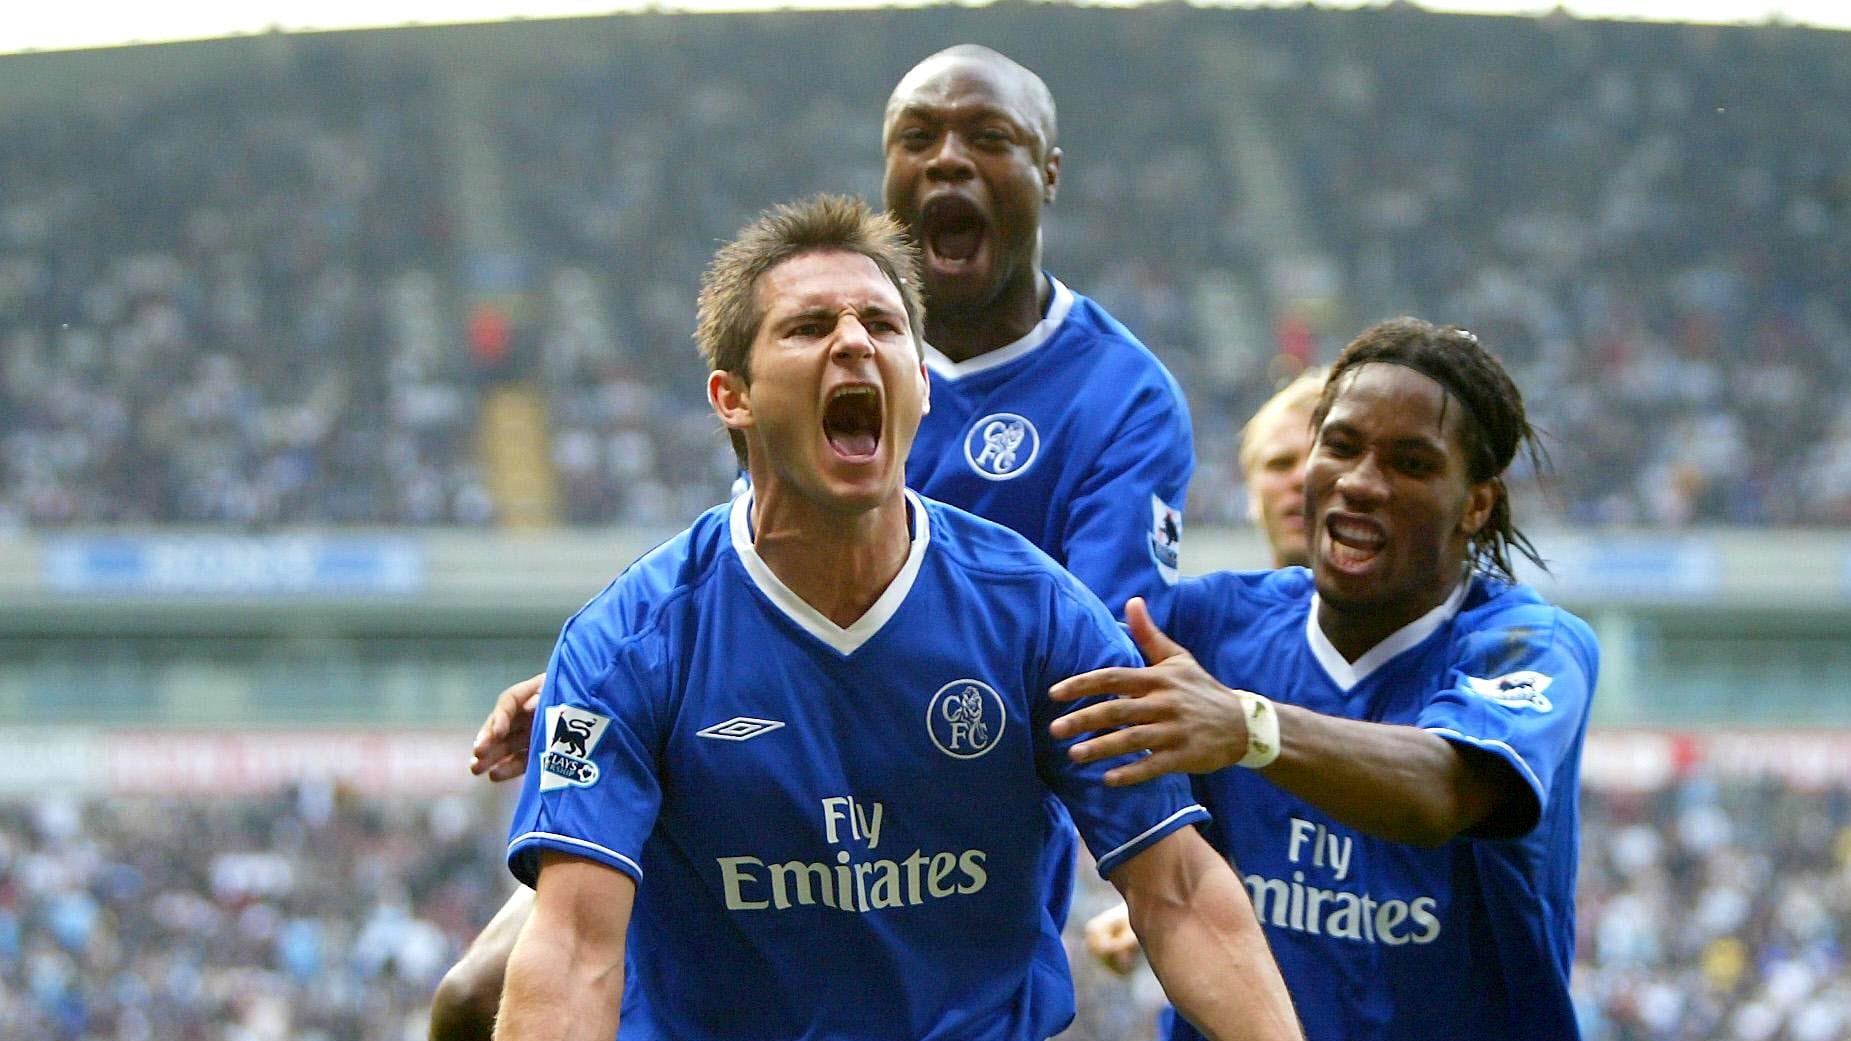 Frank Lampard scored twice to help Chelsea to the Premier League crown